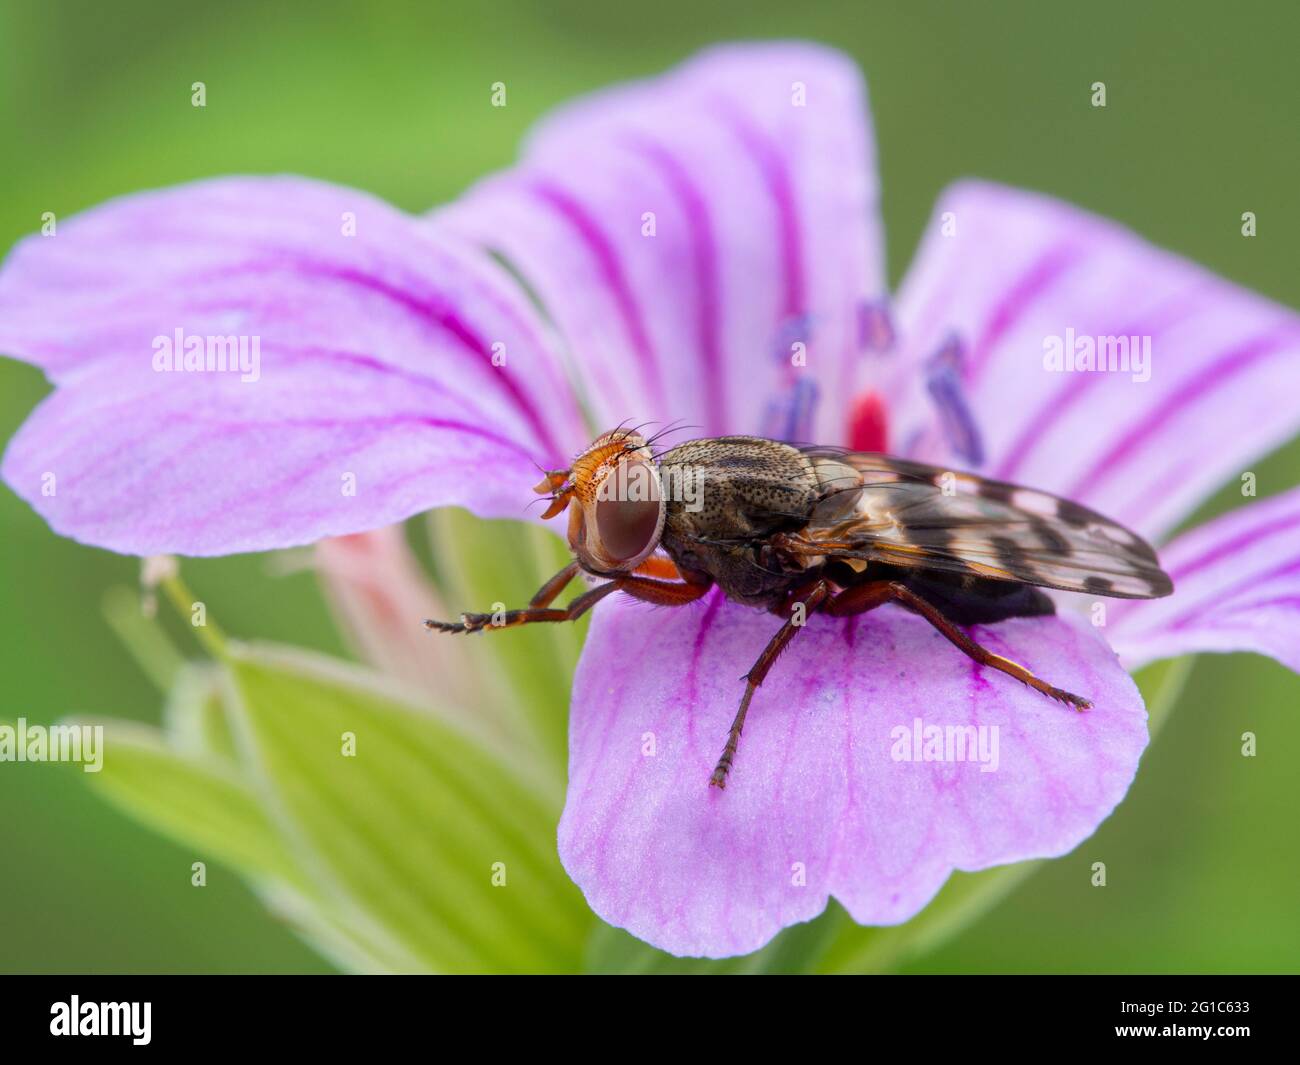 beautiful picture-winged fly, Ulidiidae species, resting on a pink (hardy) Geranium flower while cleaning its forelegs, side view Stock Photo